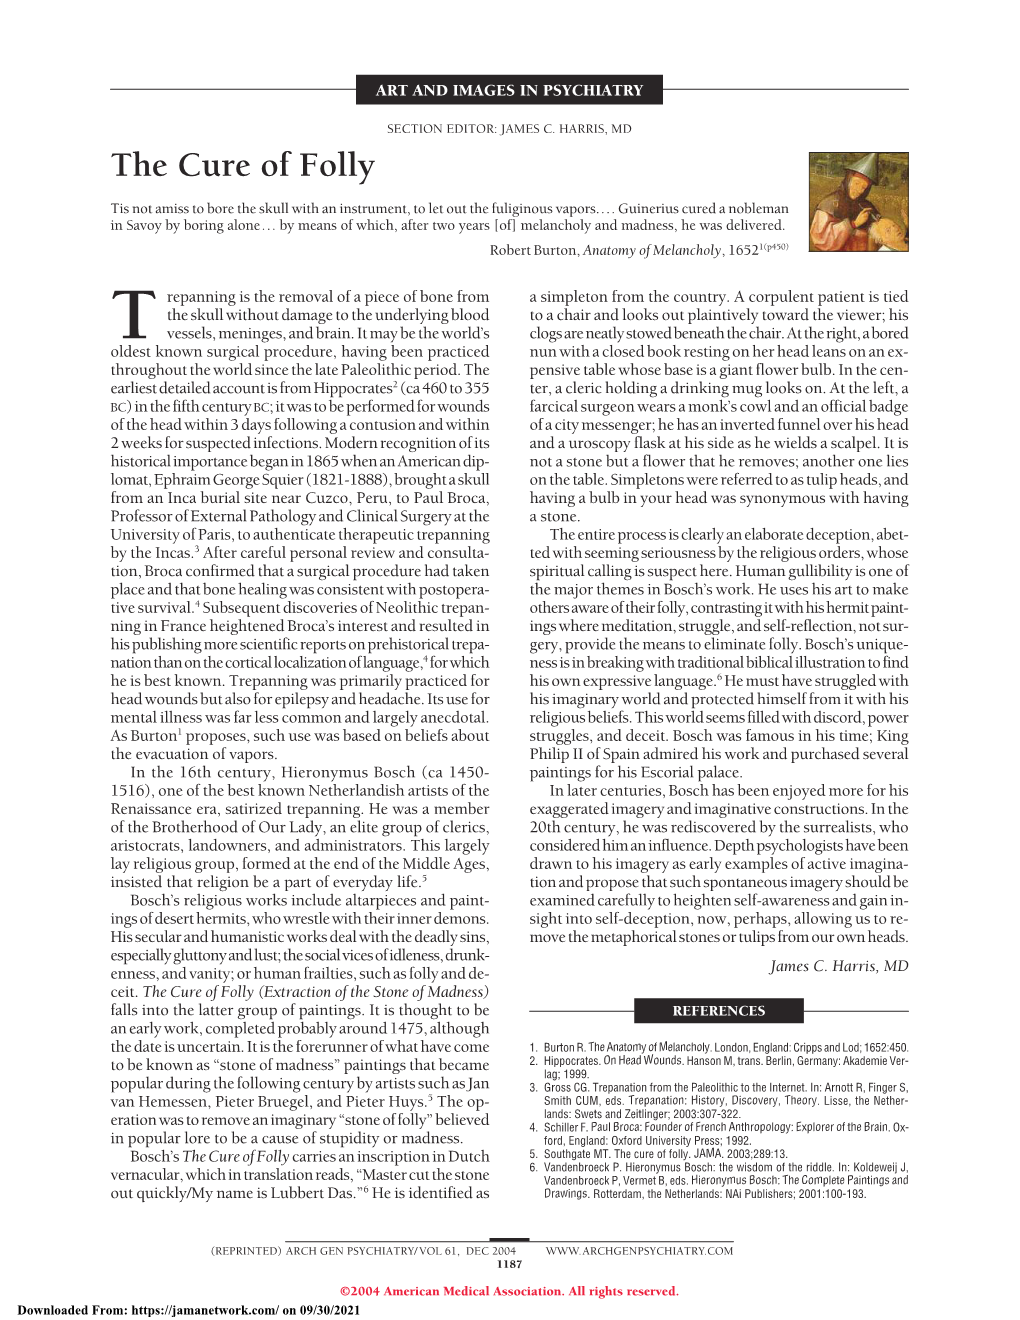 The Cure of Folly